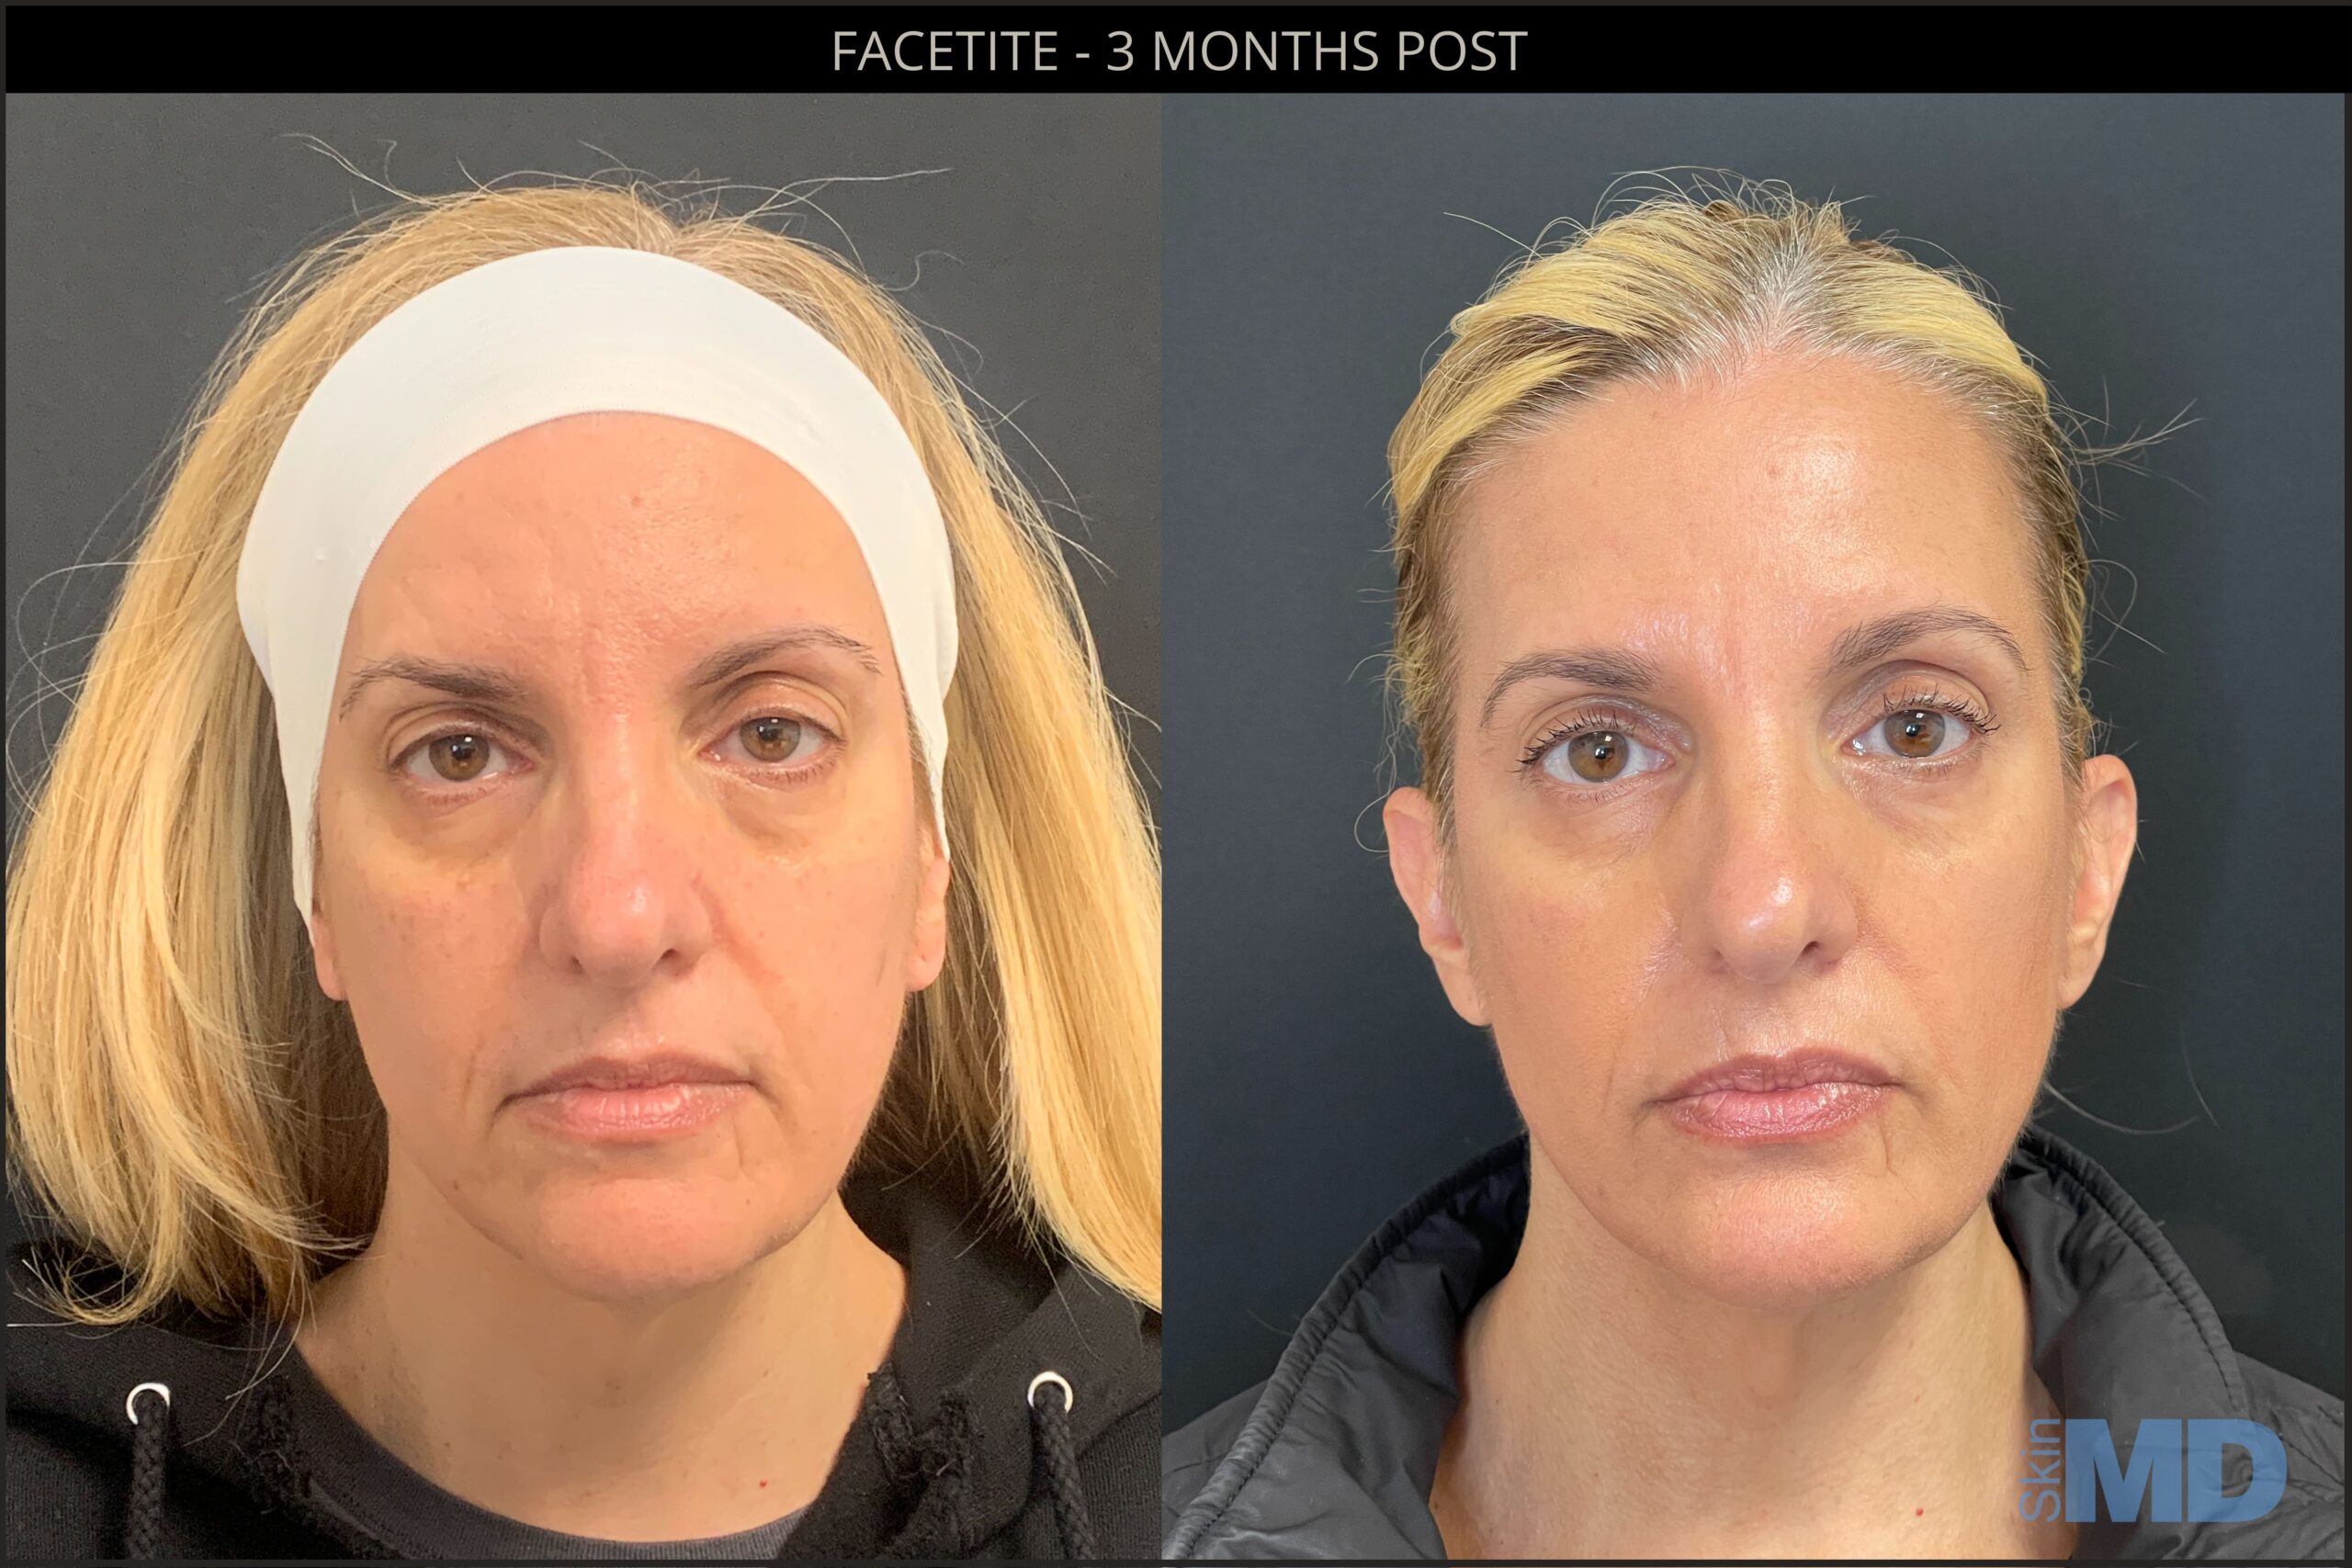 Before and after Facetite results